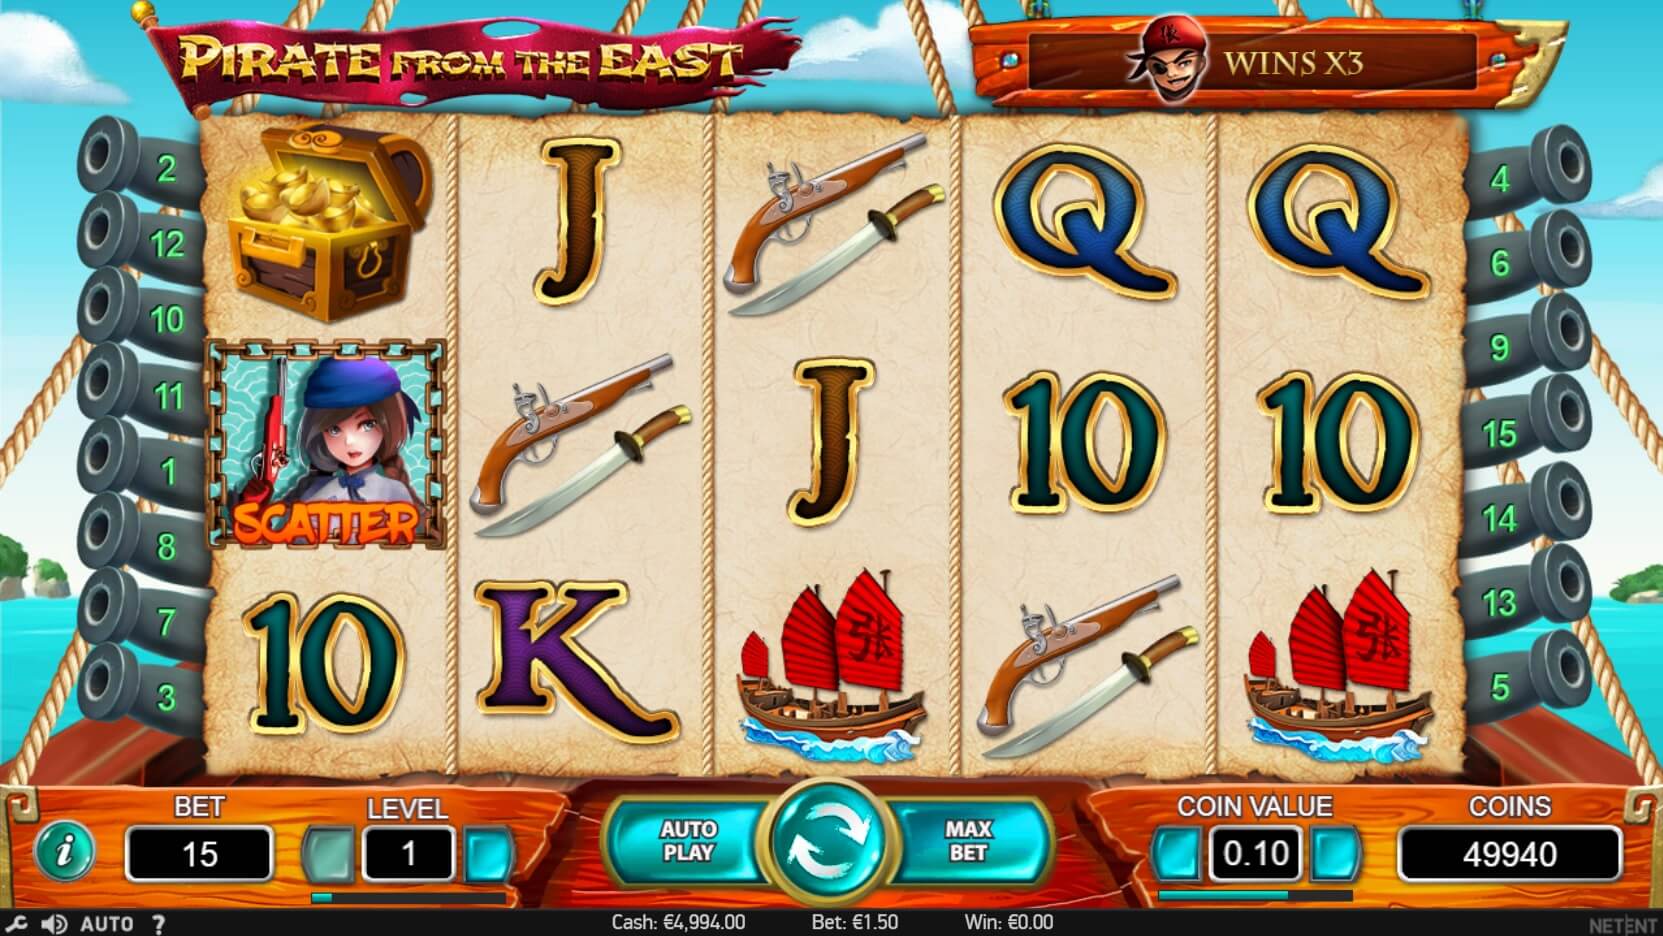 Pirate From the East Slot Machine